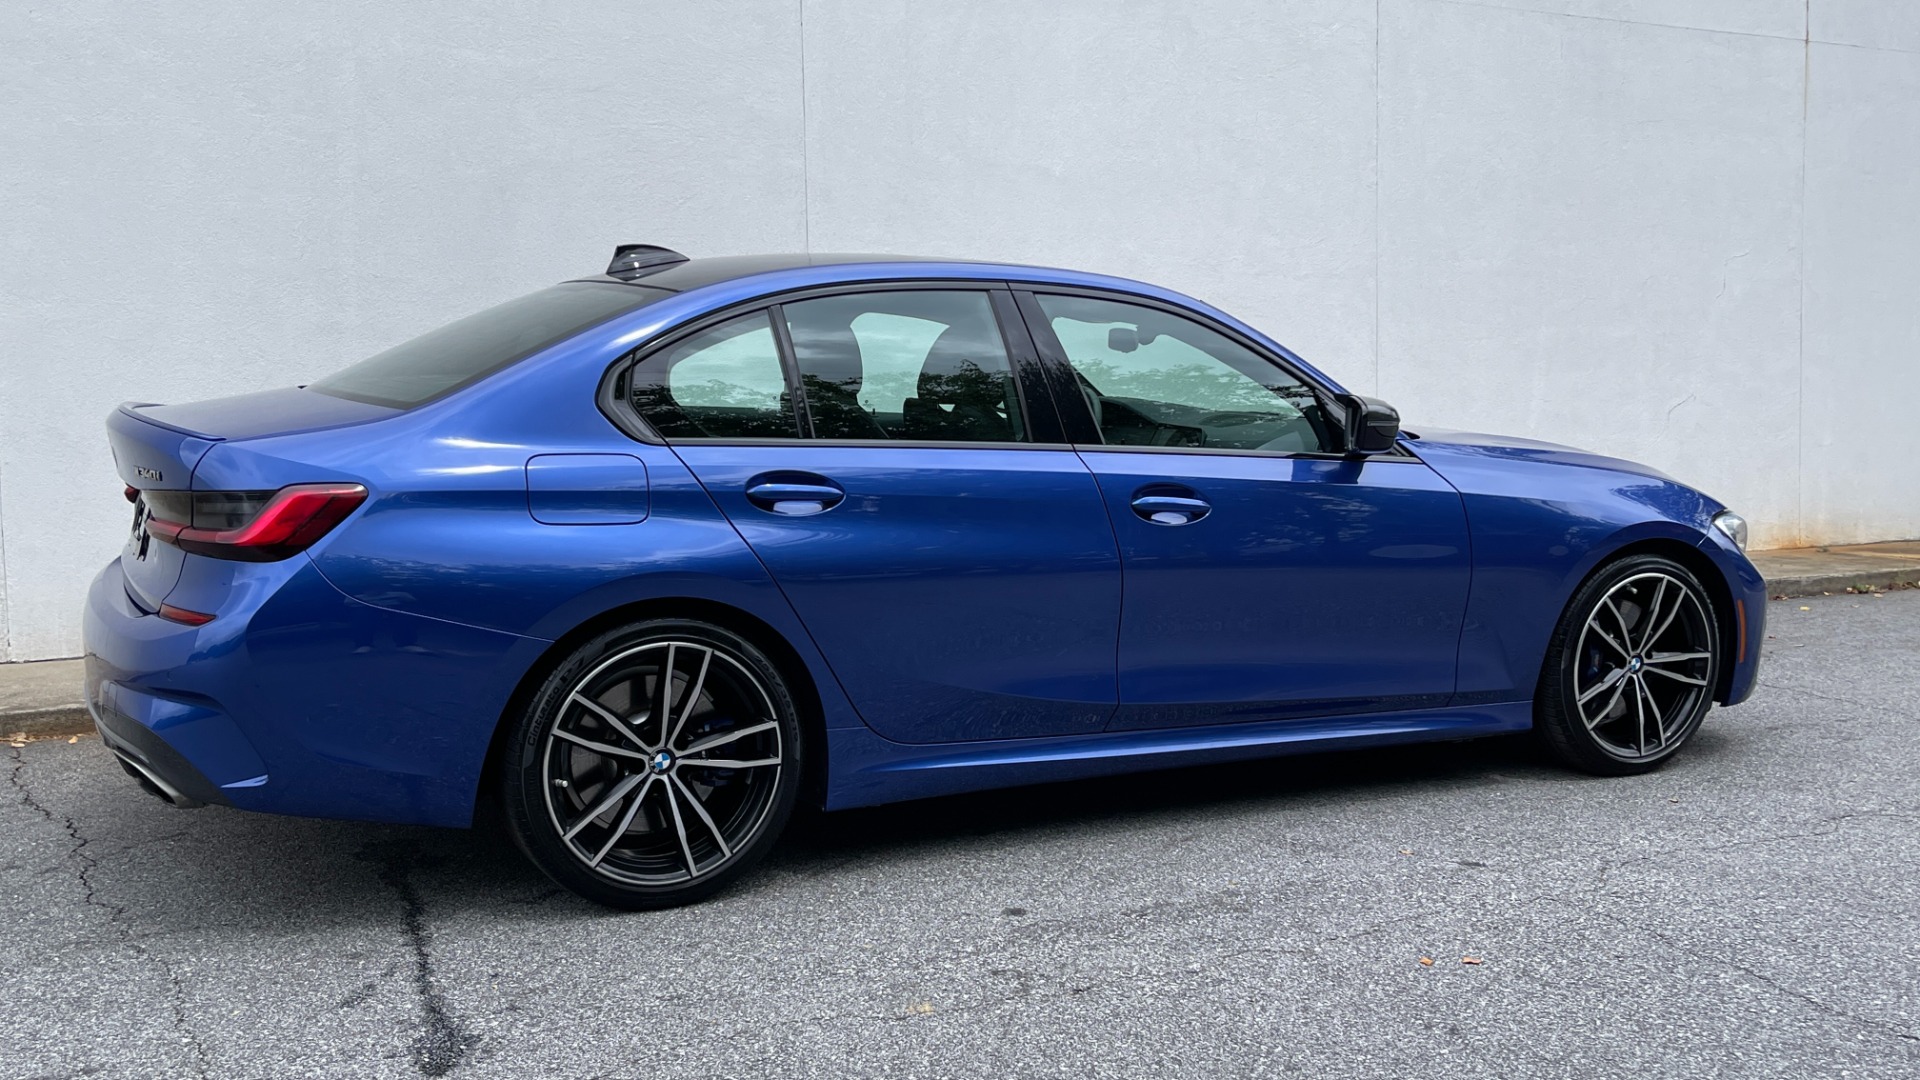 Used 2021 BMW 3 Series M340i / REMOTE START / DRIVING ASSISTANCE / 19IN WHEELS / INTAKE SYSTEM for sale Sold at Formula Imports in Charlotte NC 28227 3